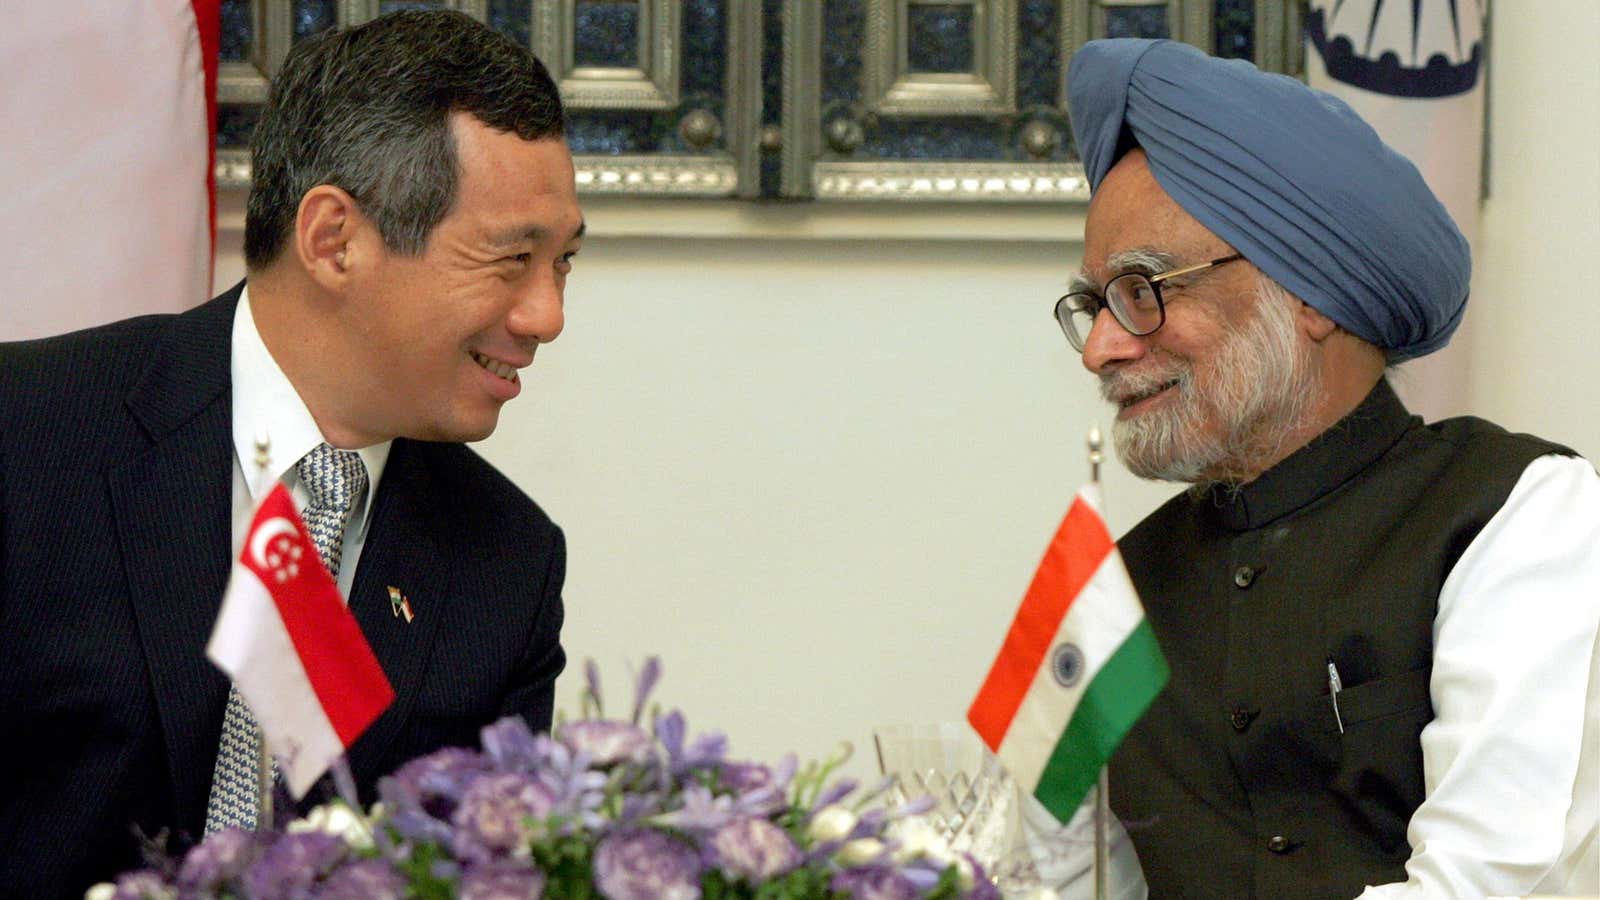 Singapore’s Prime Minister Loong and his (then) Indian counterpart Manmohan Singh in 2005.